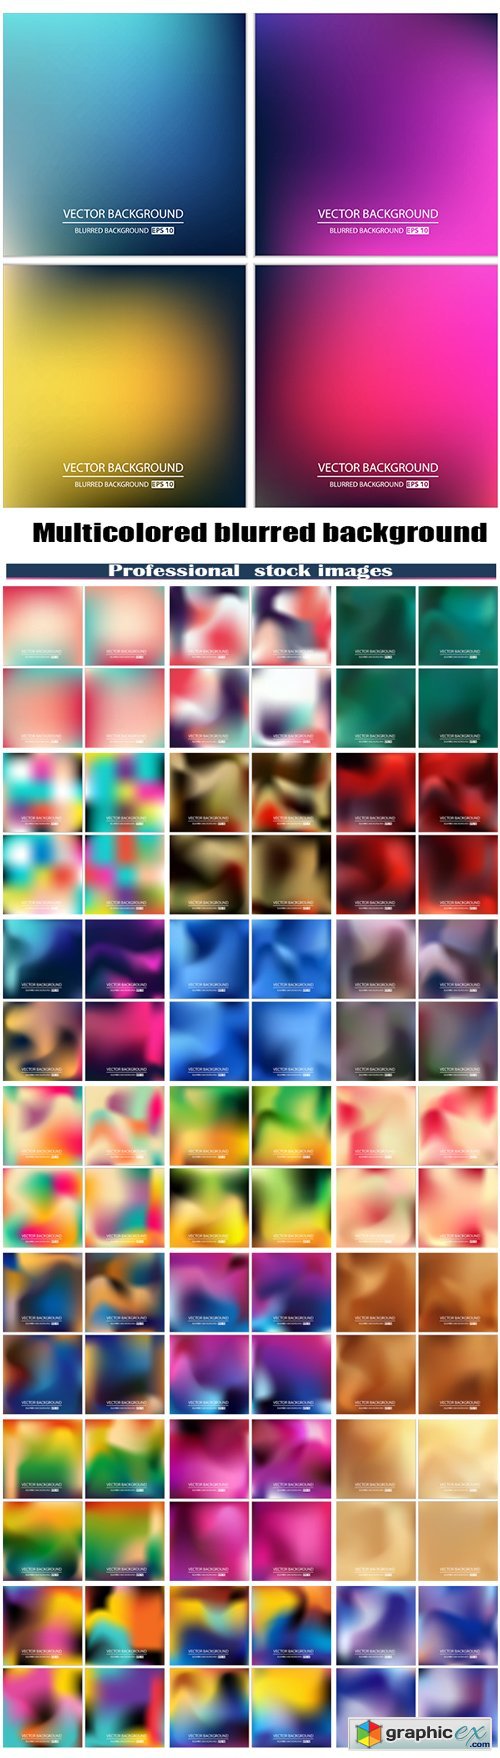 Abstract creative vector multicolored blurred background